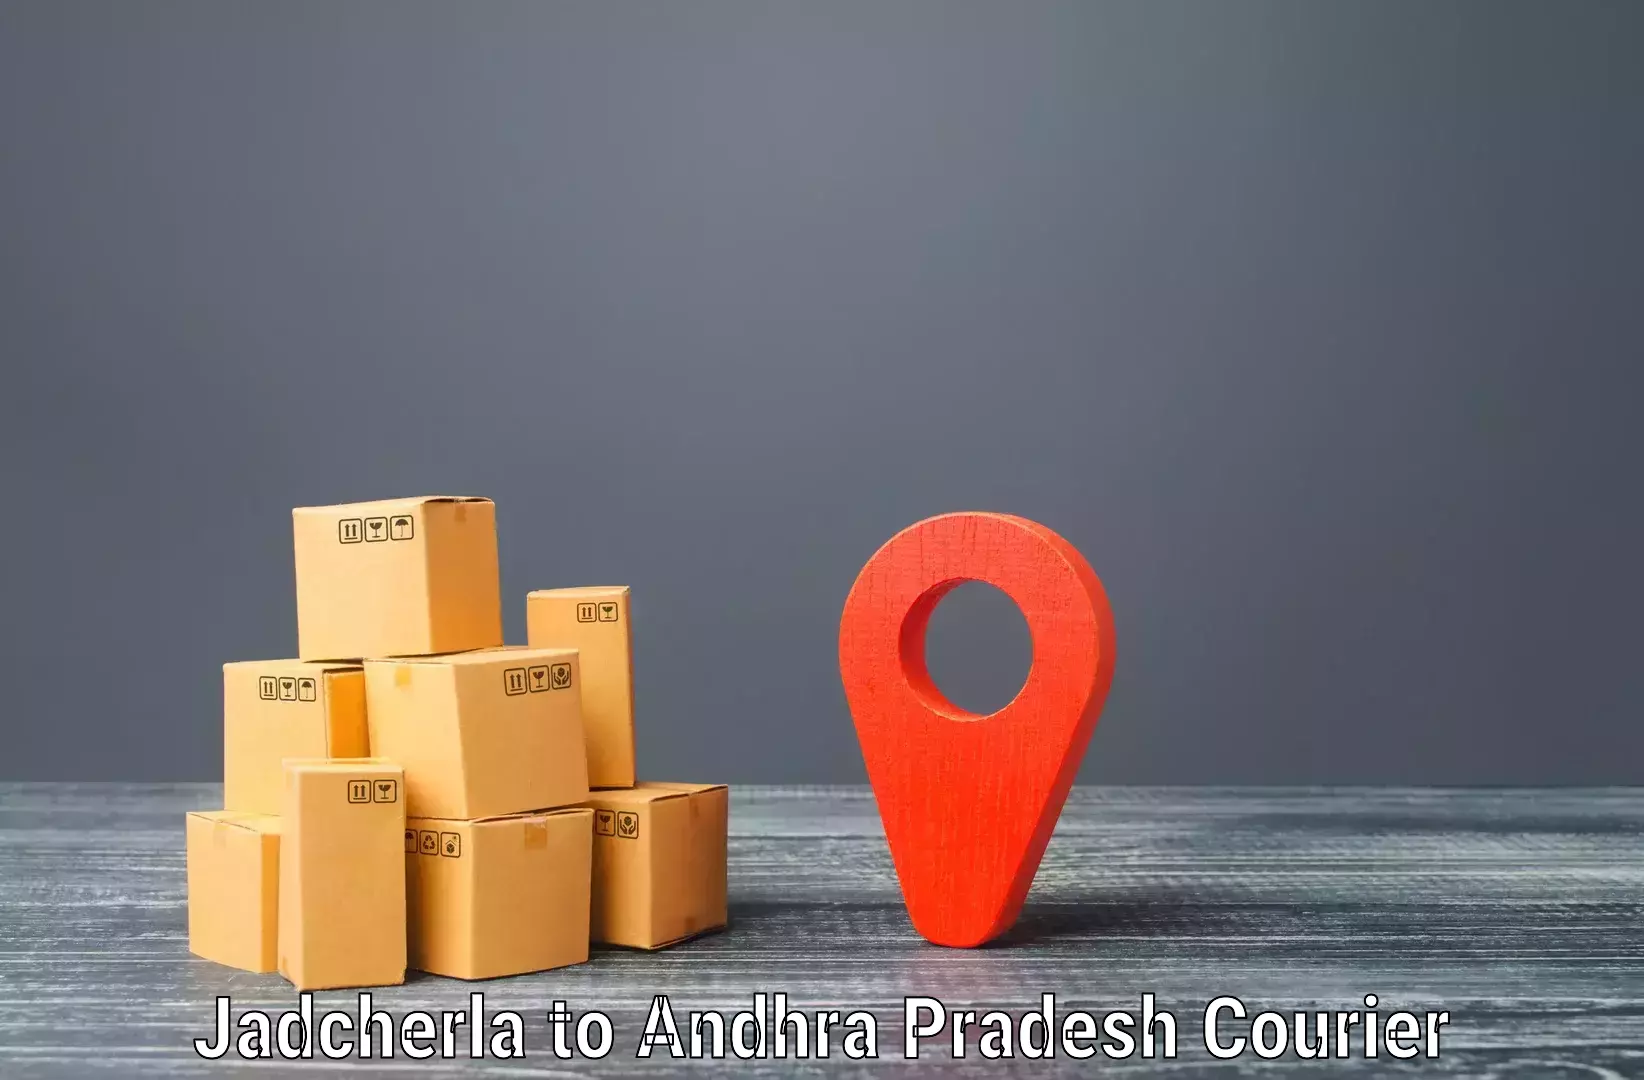 Easy access courier services in Jadcherla to Narsipatnam